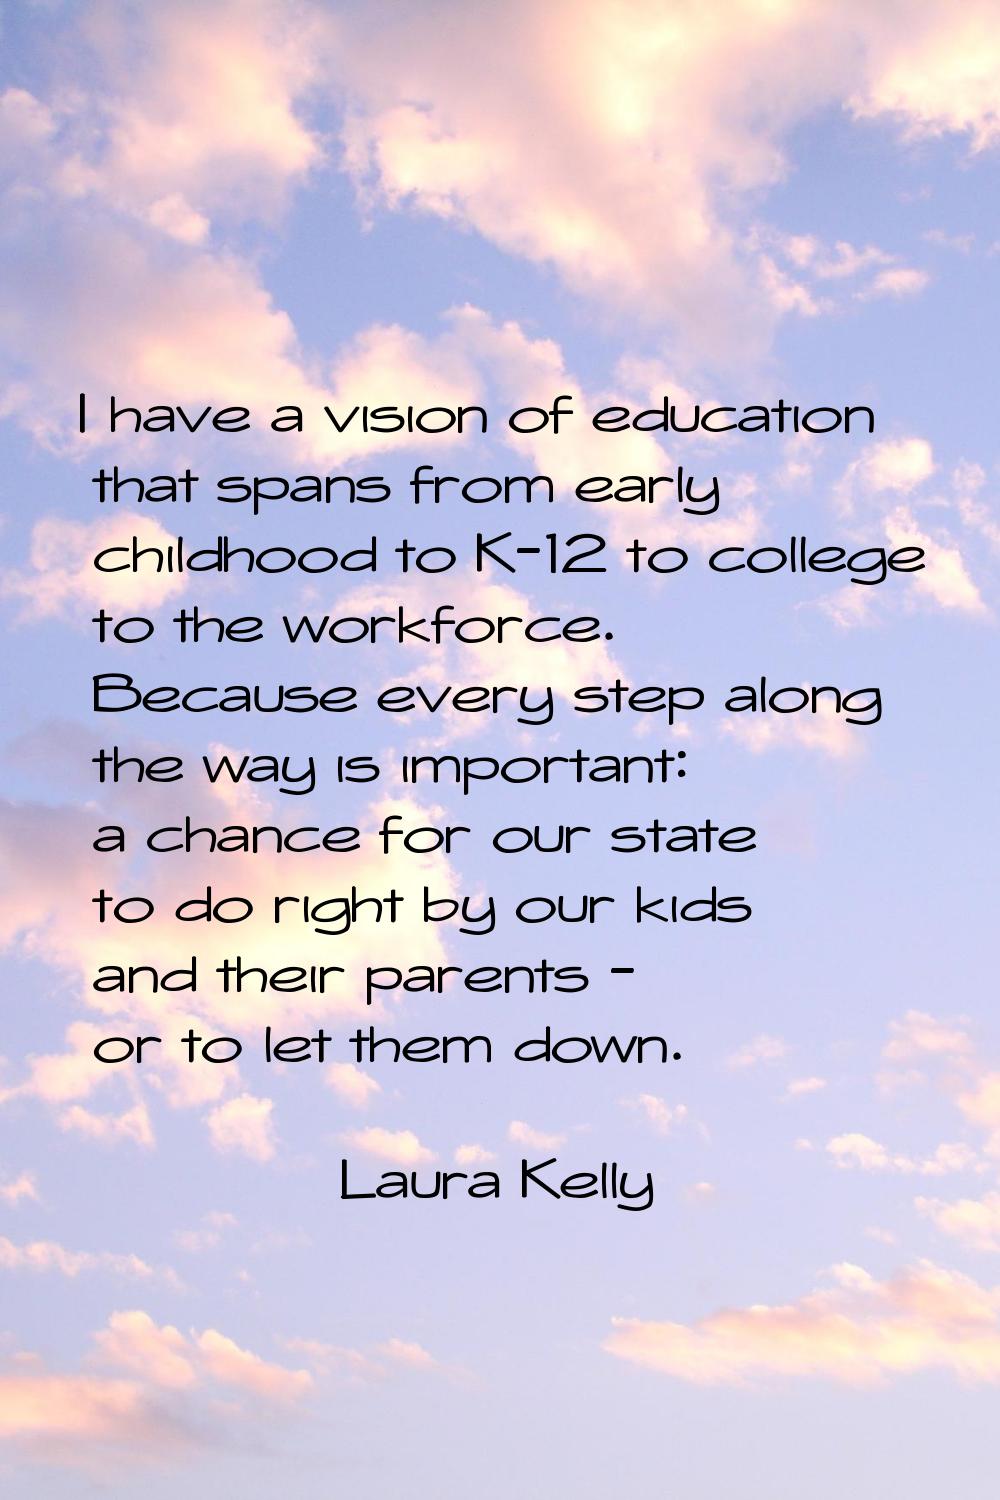 I have a vision of education that spans from early childhood to K-12 to college to the workforce. B